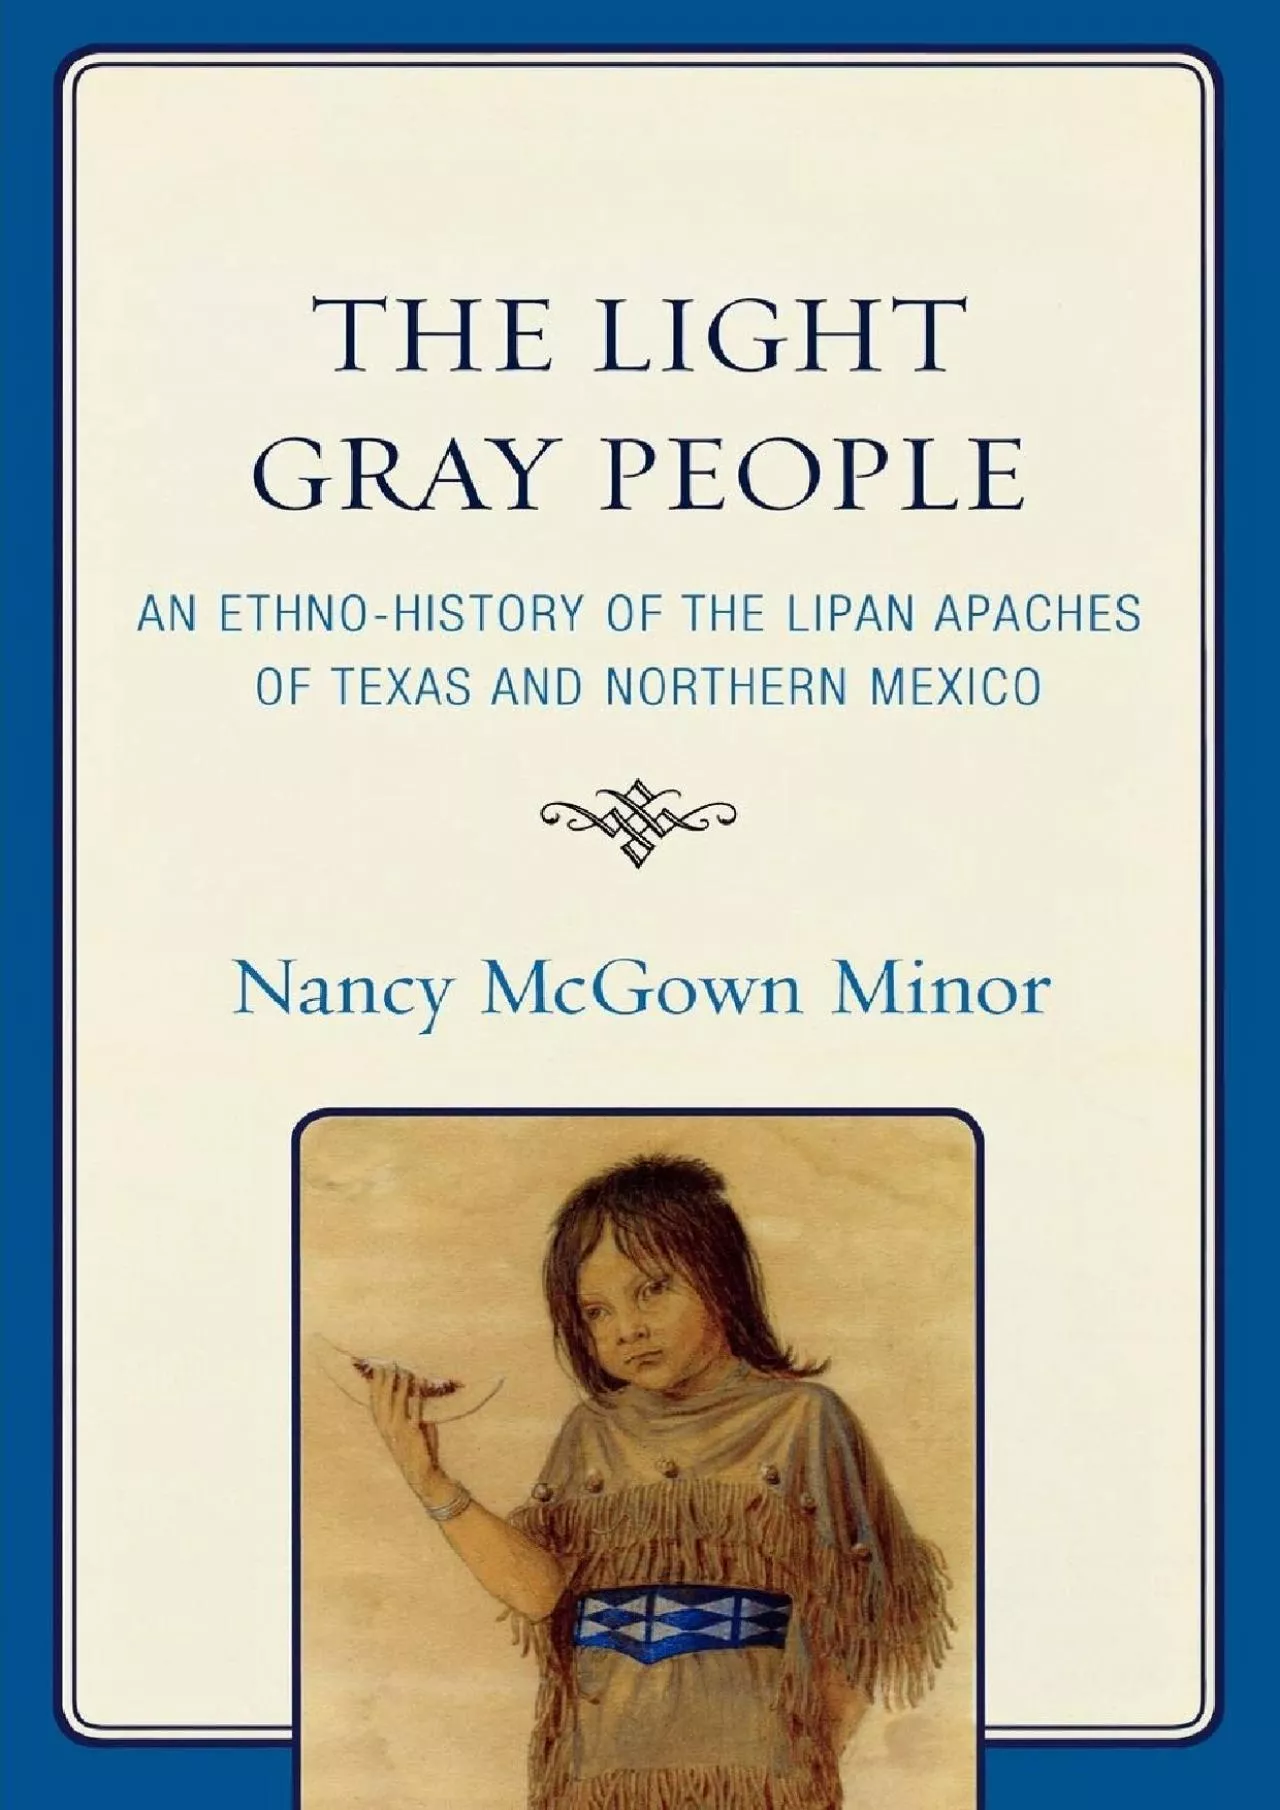 (BOOK)-The Light Gray People: An Ethno-History of the Lipan Apaches of Texas and Northern